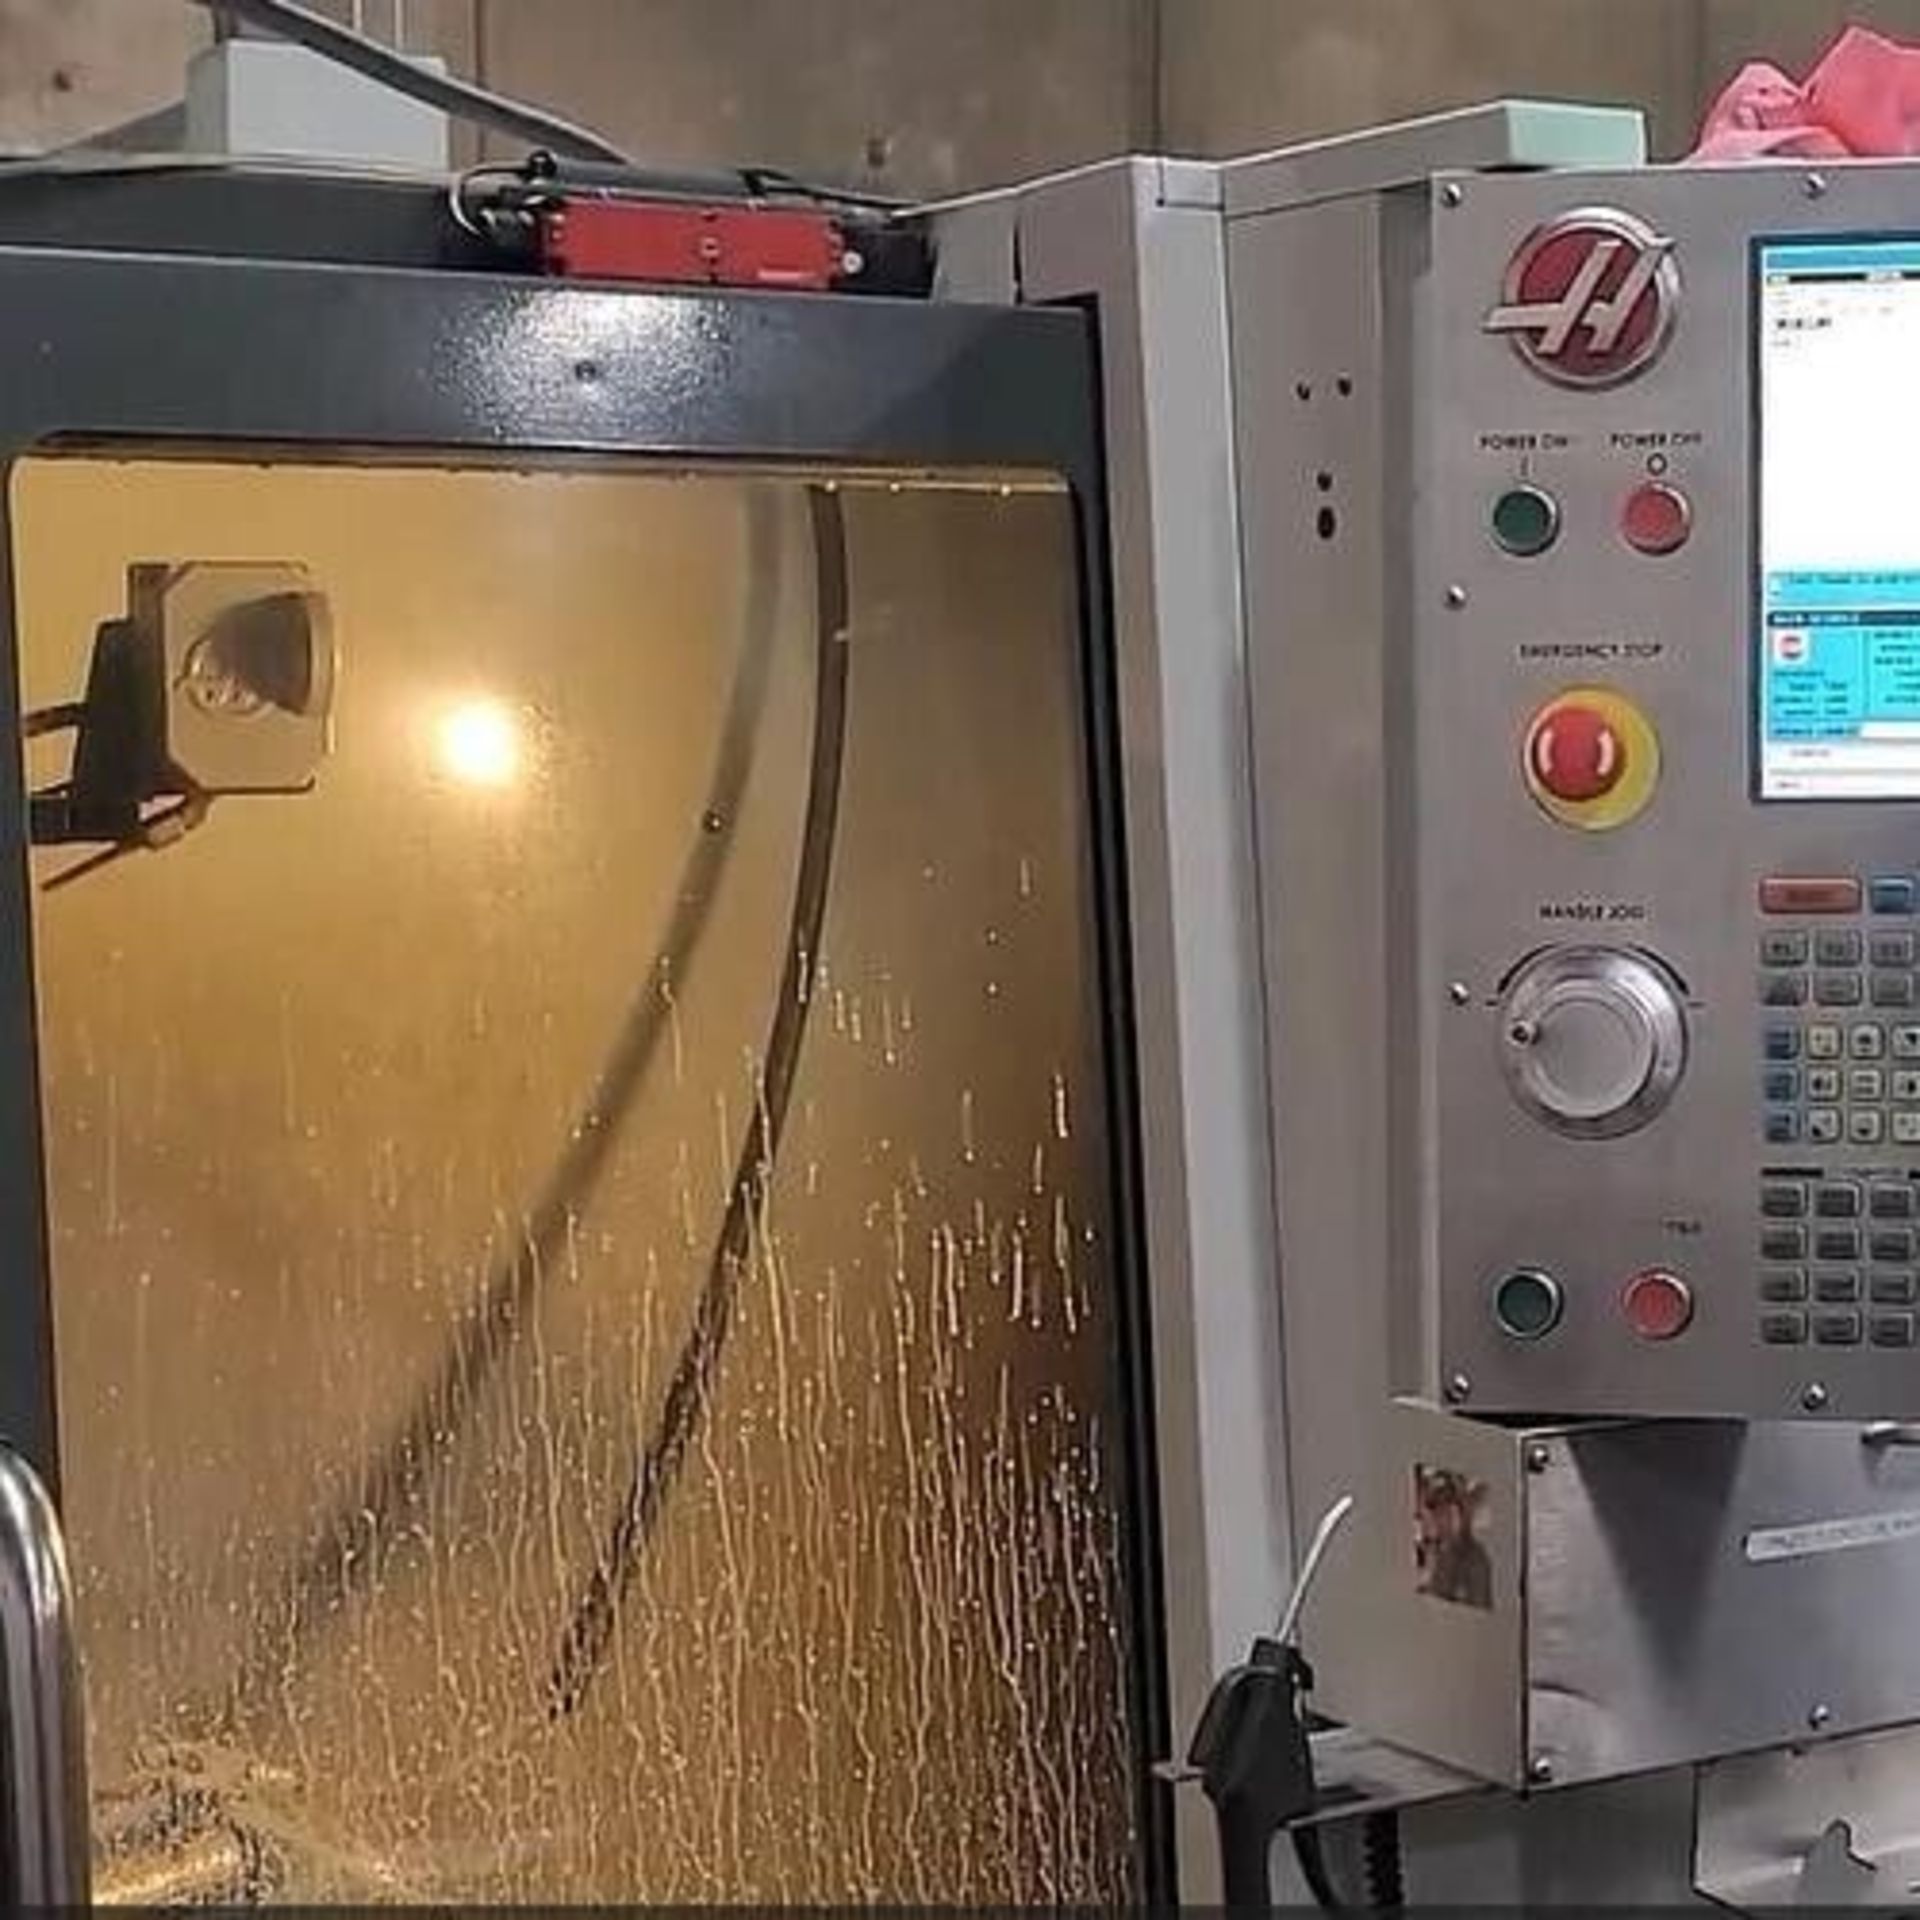 2012 HAAS VF-1 CNC Vertical Machining Center - Image 8 of 10